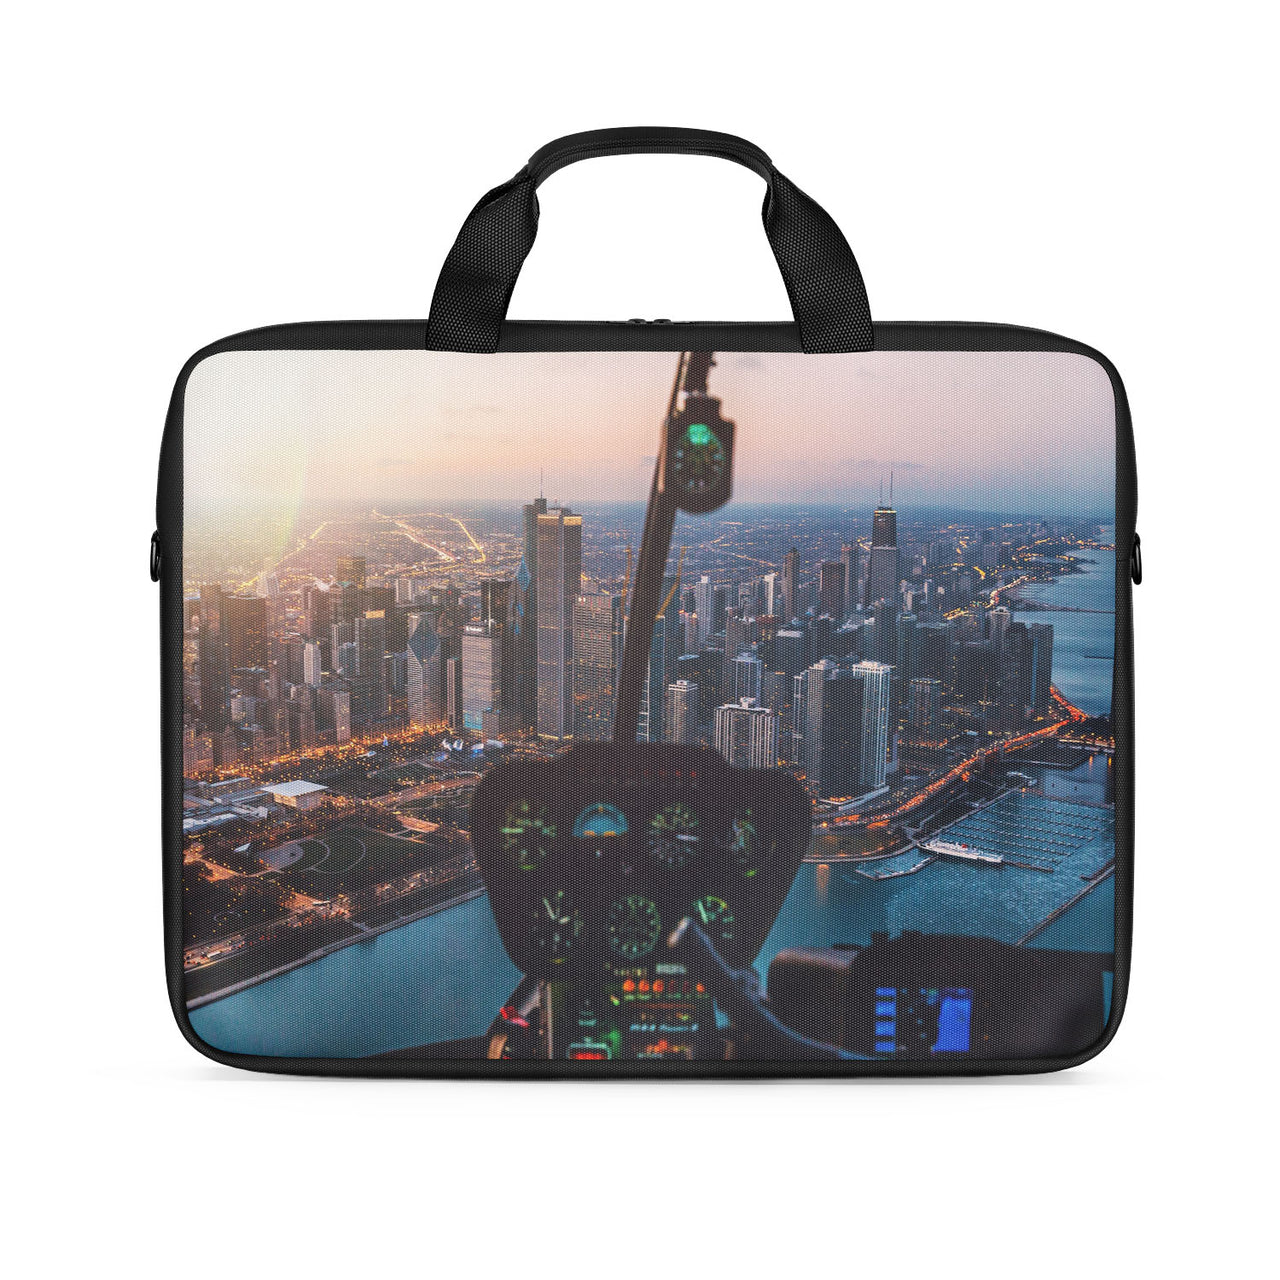 Amazing City View from Helicopter Cockpit Designed Laptop & Tablet Bags